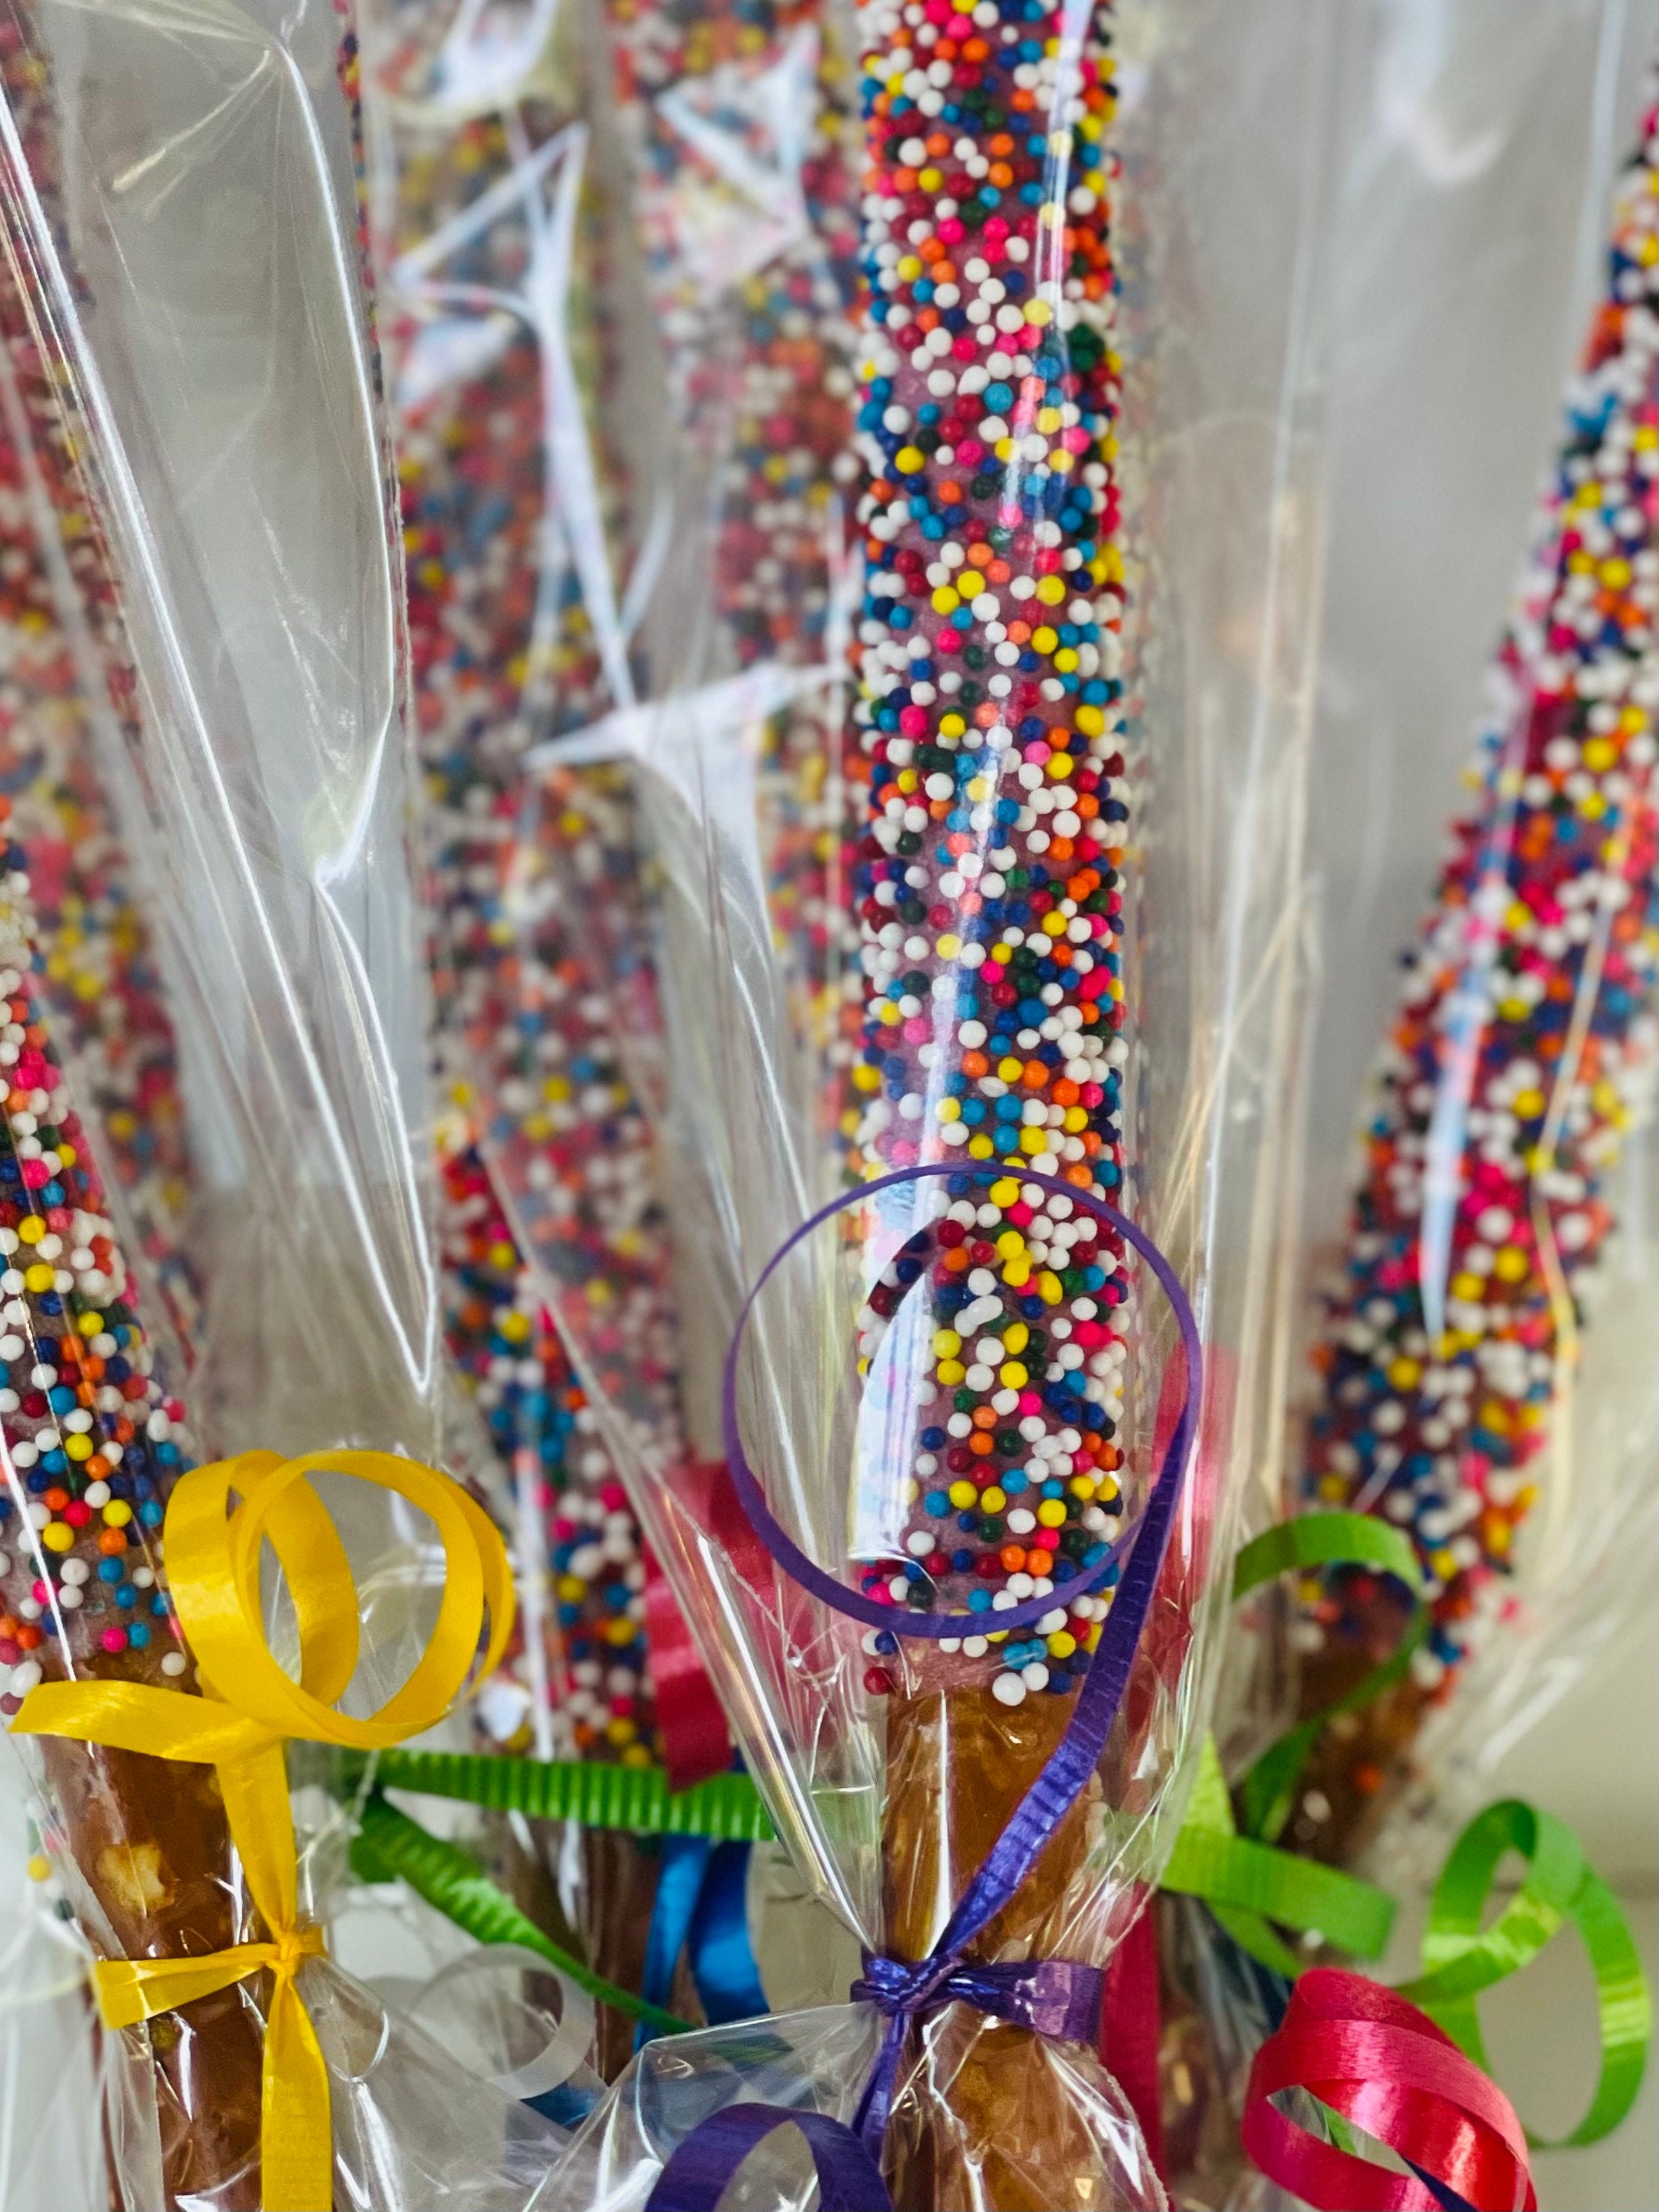 Art Party favor bags, Painting Party favors, Personalized Candy Bags, Favor  bags, Candy Buffet, Birthday party, Sweets, Treats